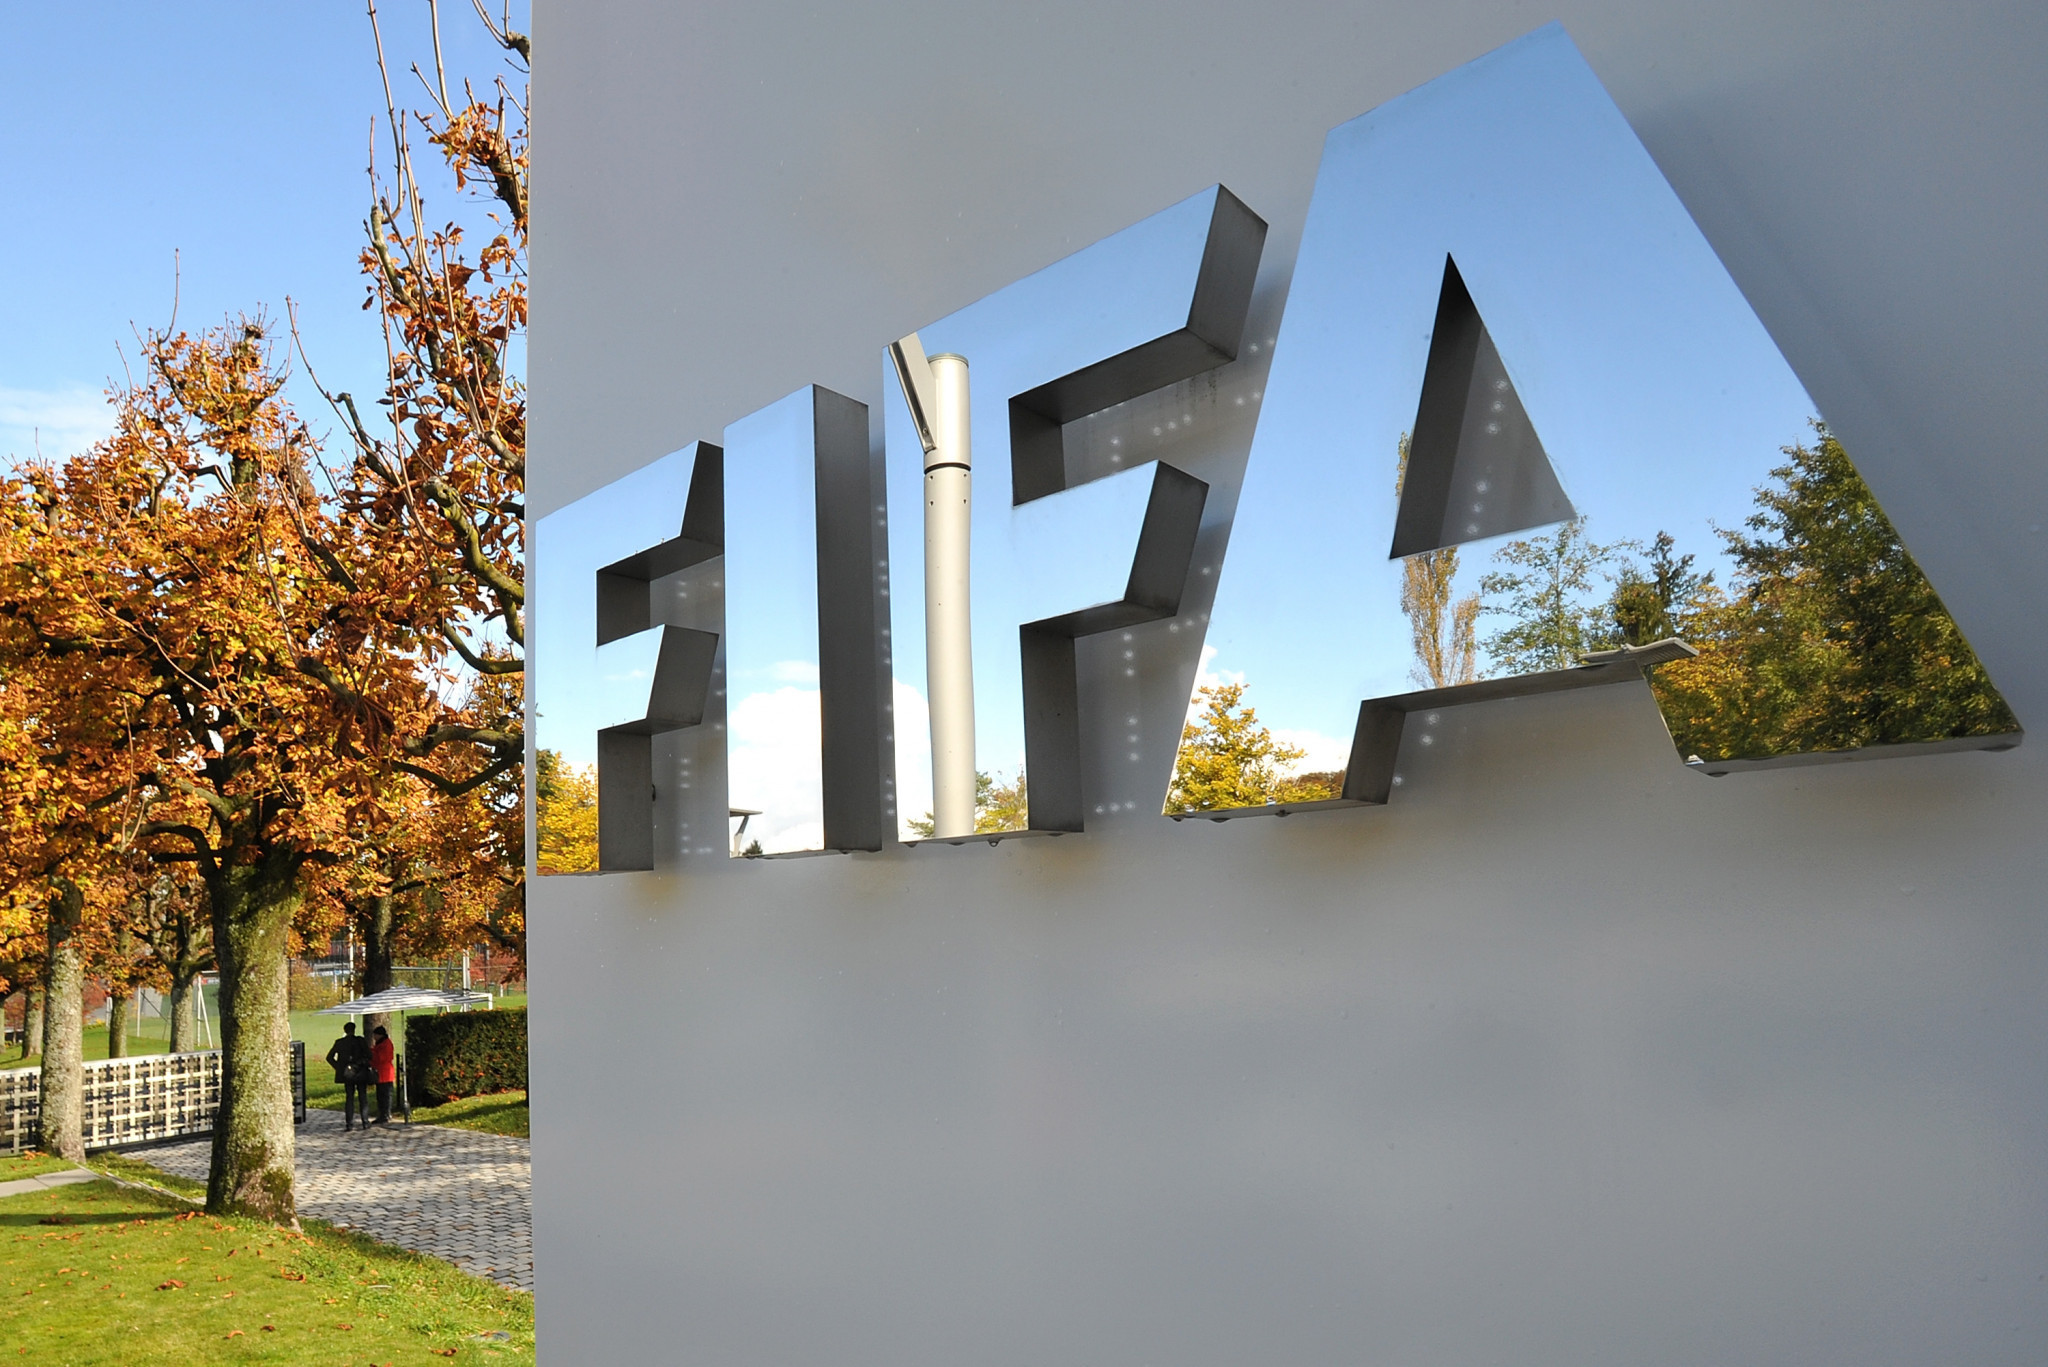 FIFA has asked to be compensated for the payment, with lawyer Catherine Hohl-Chirazi alleging that it had been "cheated with shrewdness" ©Getty Images